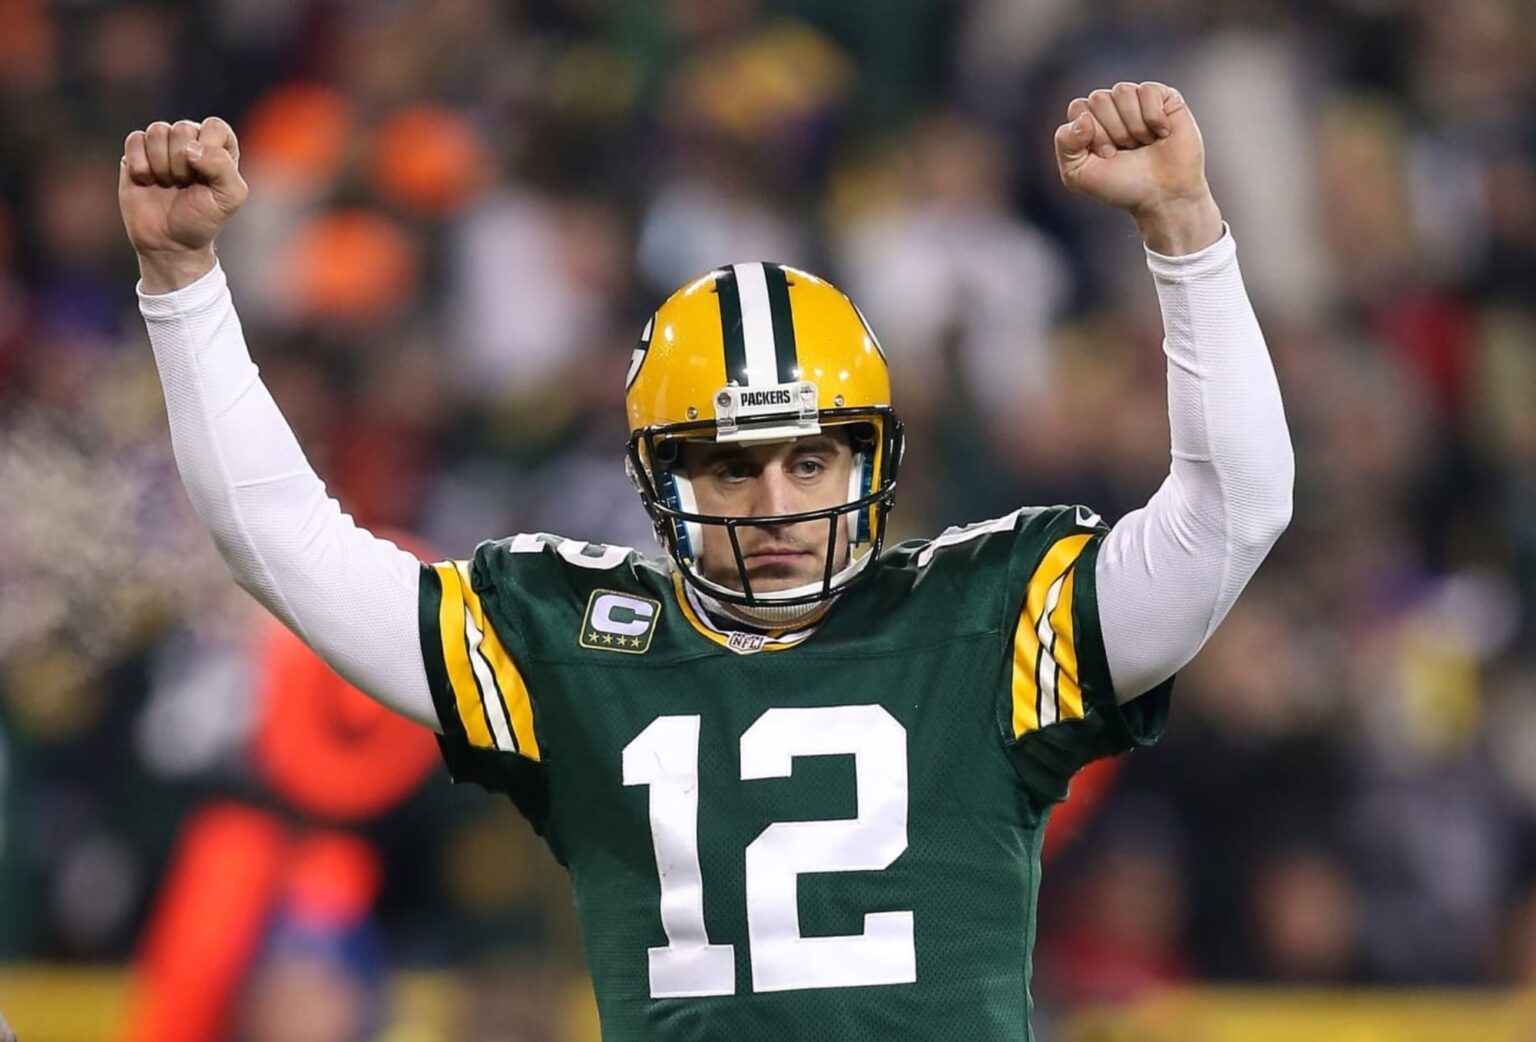 Aaron Rodgers just became NFL history by throwing over 50,000 yards! Here's how the legendary feat happened.